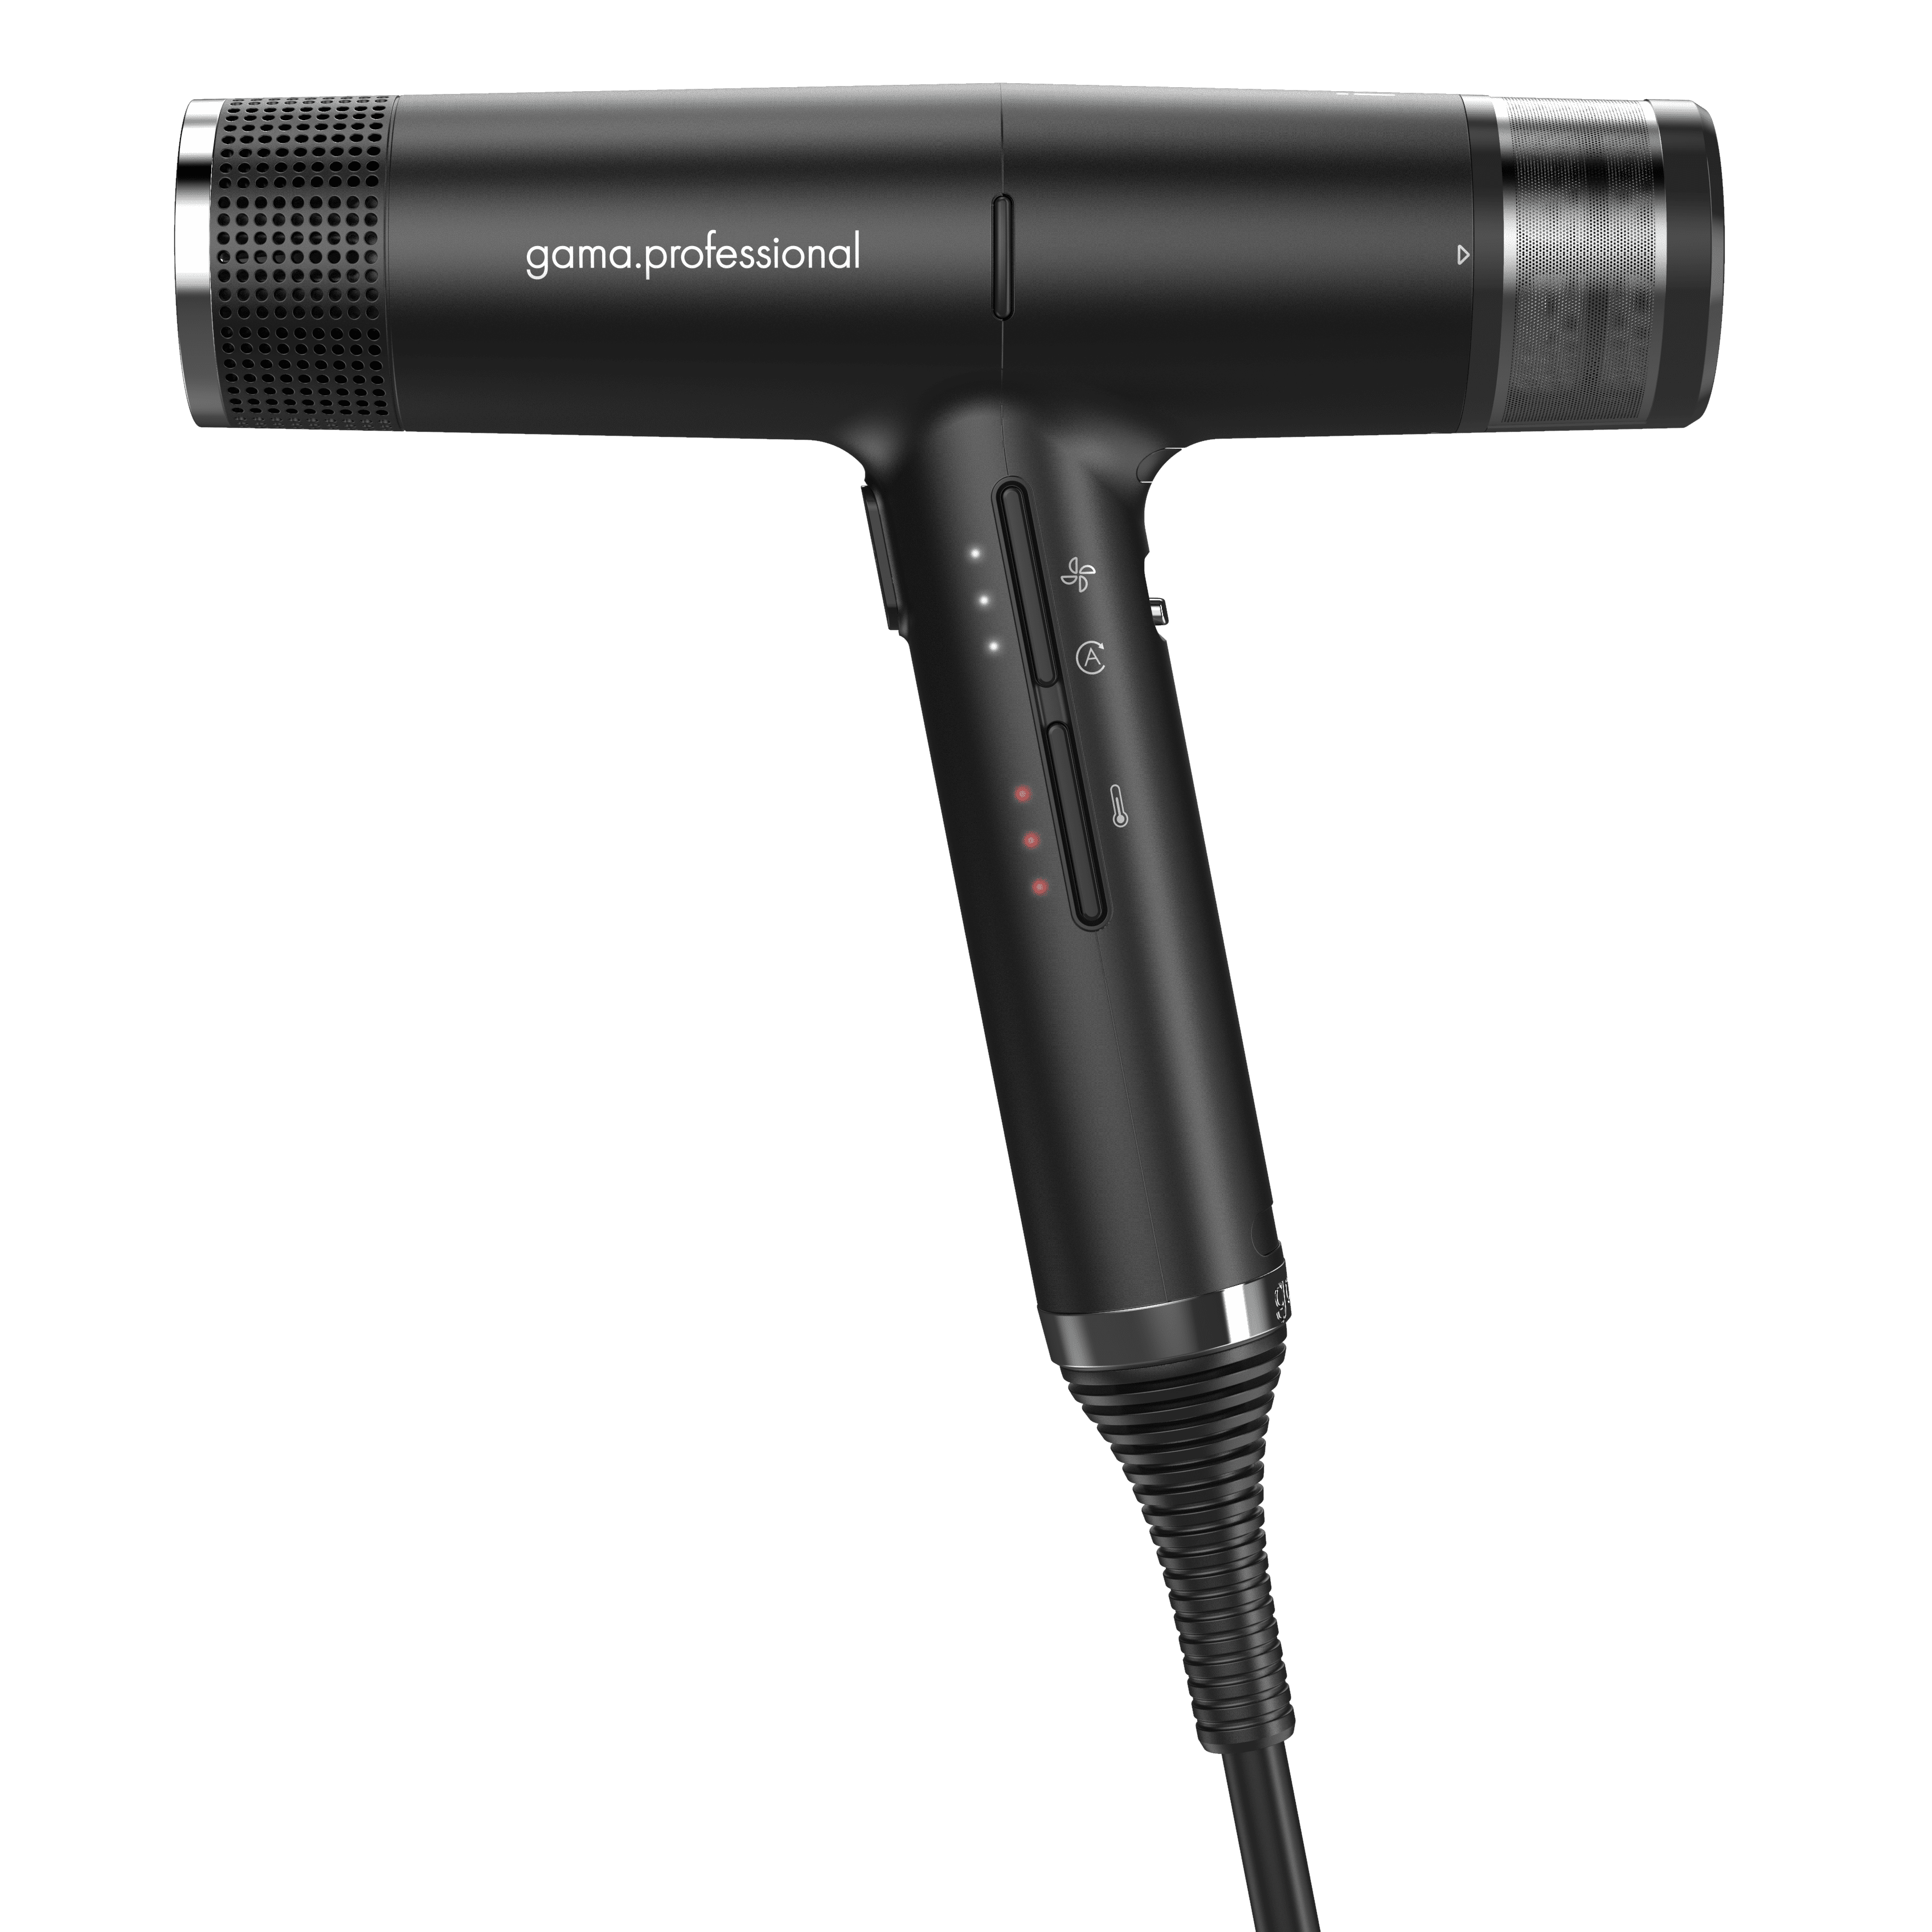 HAIRDRYER IQ1 PERFETTO - Hairdryers - Gama Professional